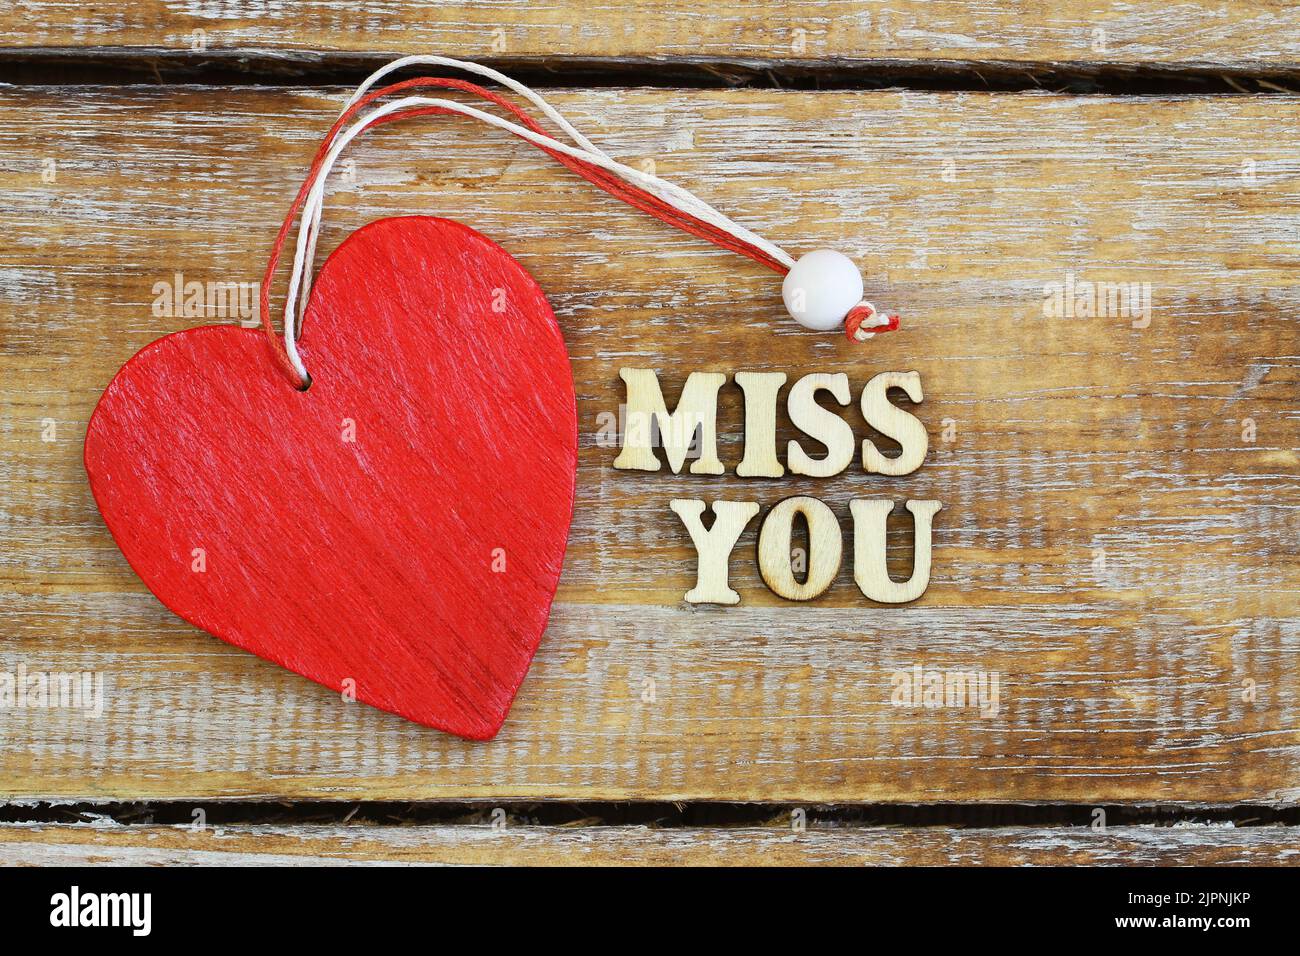 Miss you written with wooden letters and red wooden heart on rustic surface Stock Photo